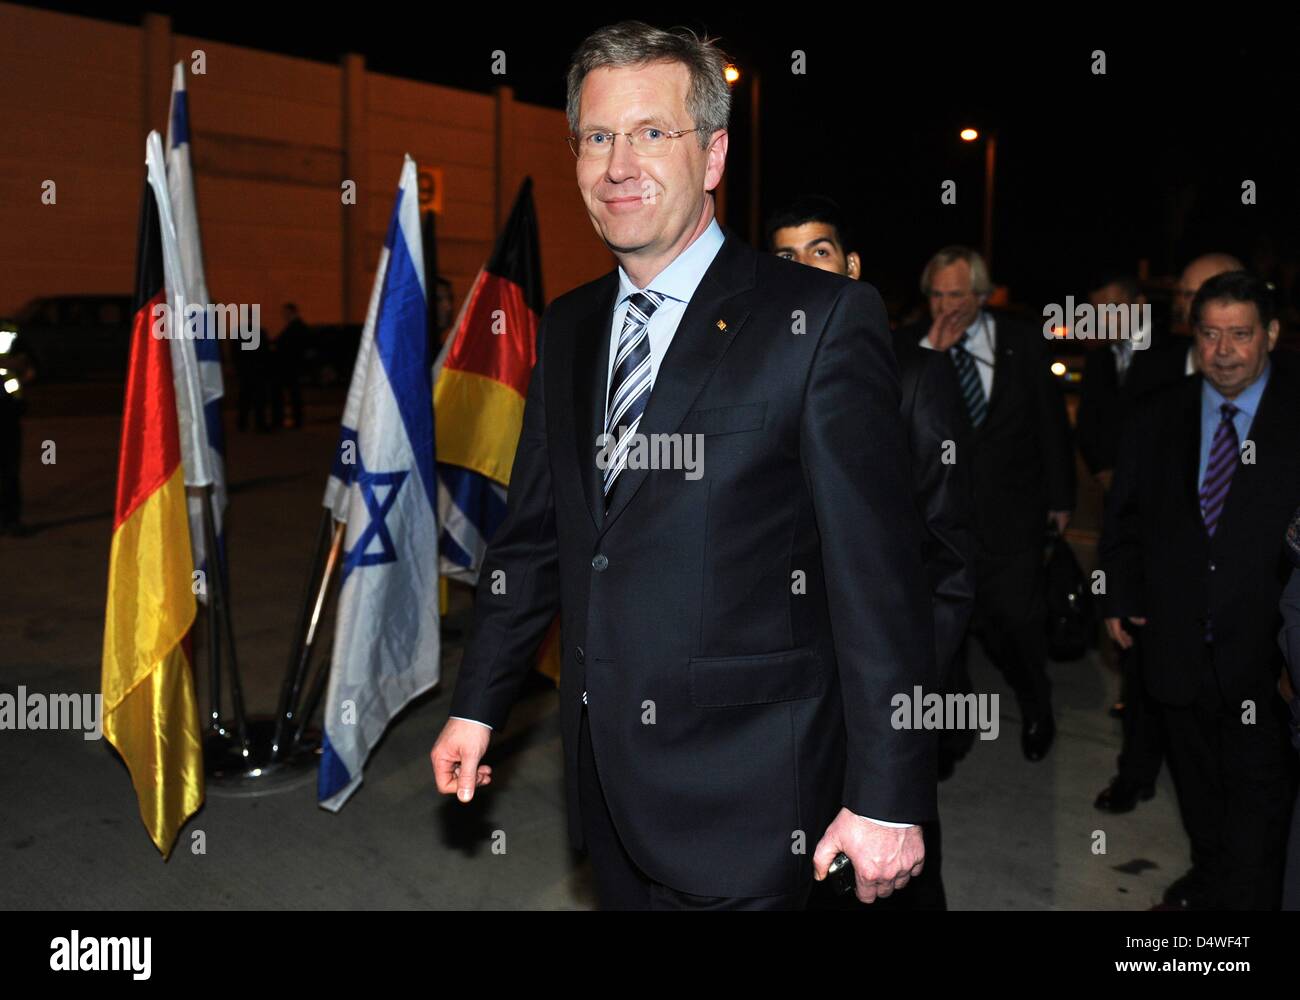 German President Christian Wulff walks past German and Israeli flags after arriving with daughter Annalena in Tel Aviv, Israel, 27 November 2010. Wulff's 17-year-old daughter accompanies Mr Wulff on his four-day visit to Israel in stead of his wife Bettina. The choice of travel companion is supposed to symbolize the importance of transmitting the memory of the Holocaust to younger  Stock Photo